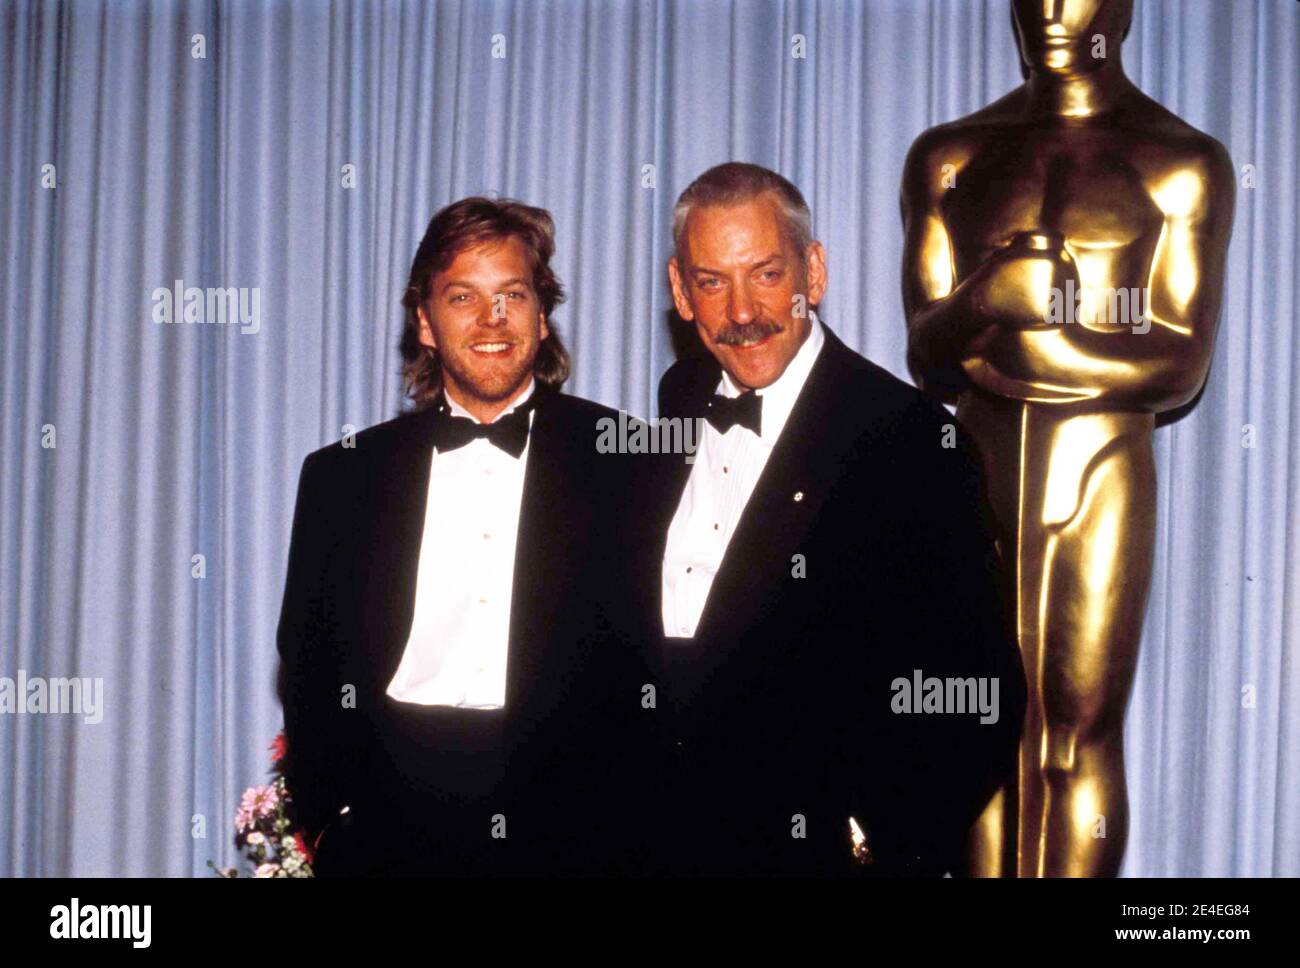 Kiefer Sutherland And Donald Sutherland at the 61st Academy Awards on March 29, 1989, at the Shrine Auditorium in Los Angeles Credit: Ralph Dominguez/MediaPunch Stock Photo